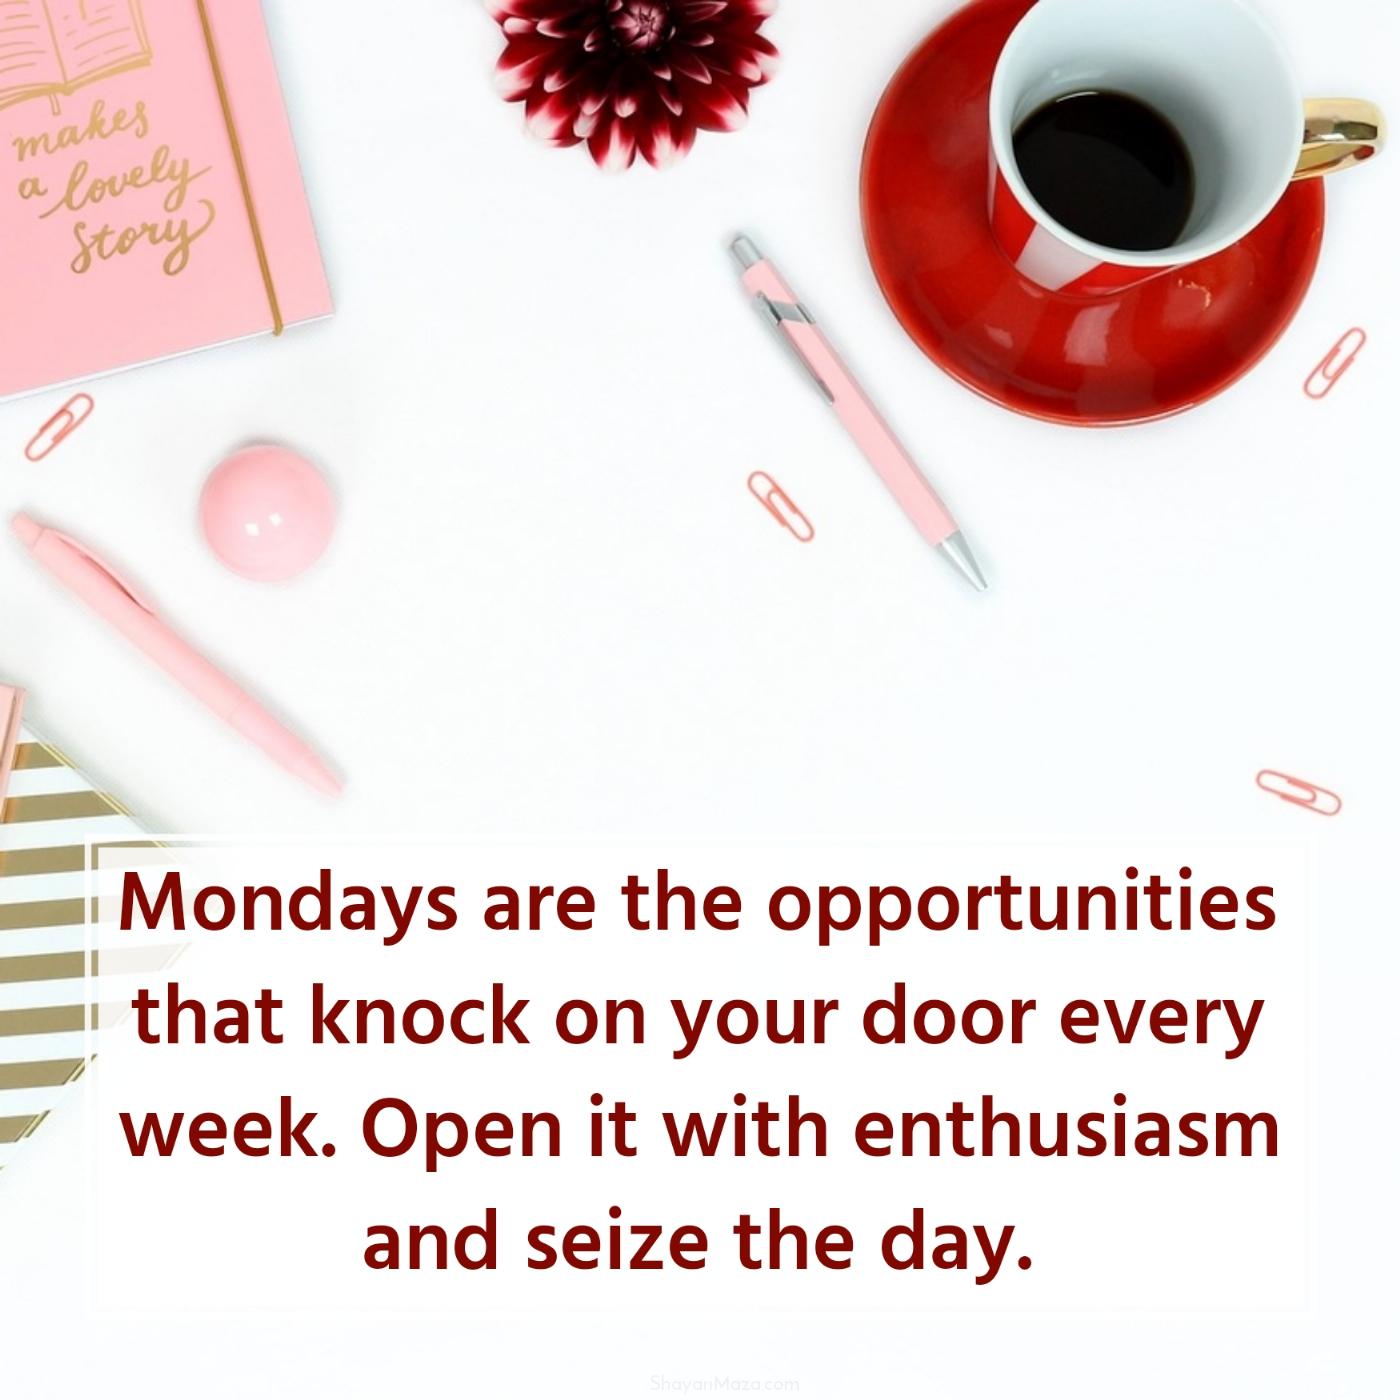 Mondays are the opportunities that knock on your door